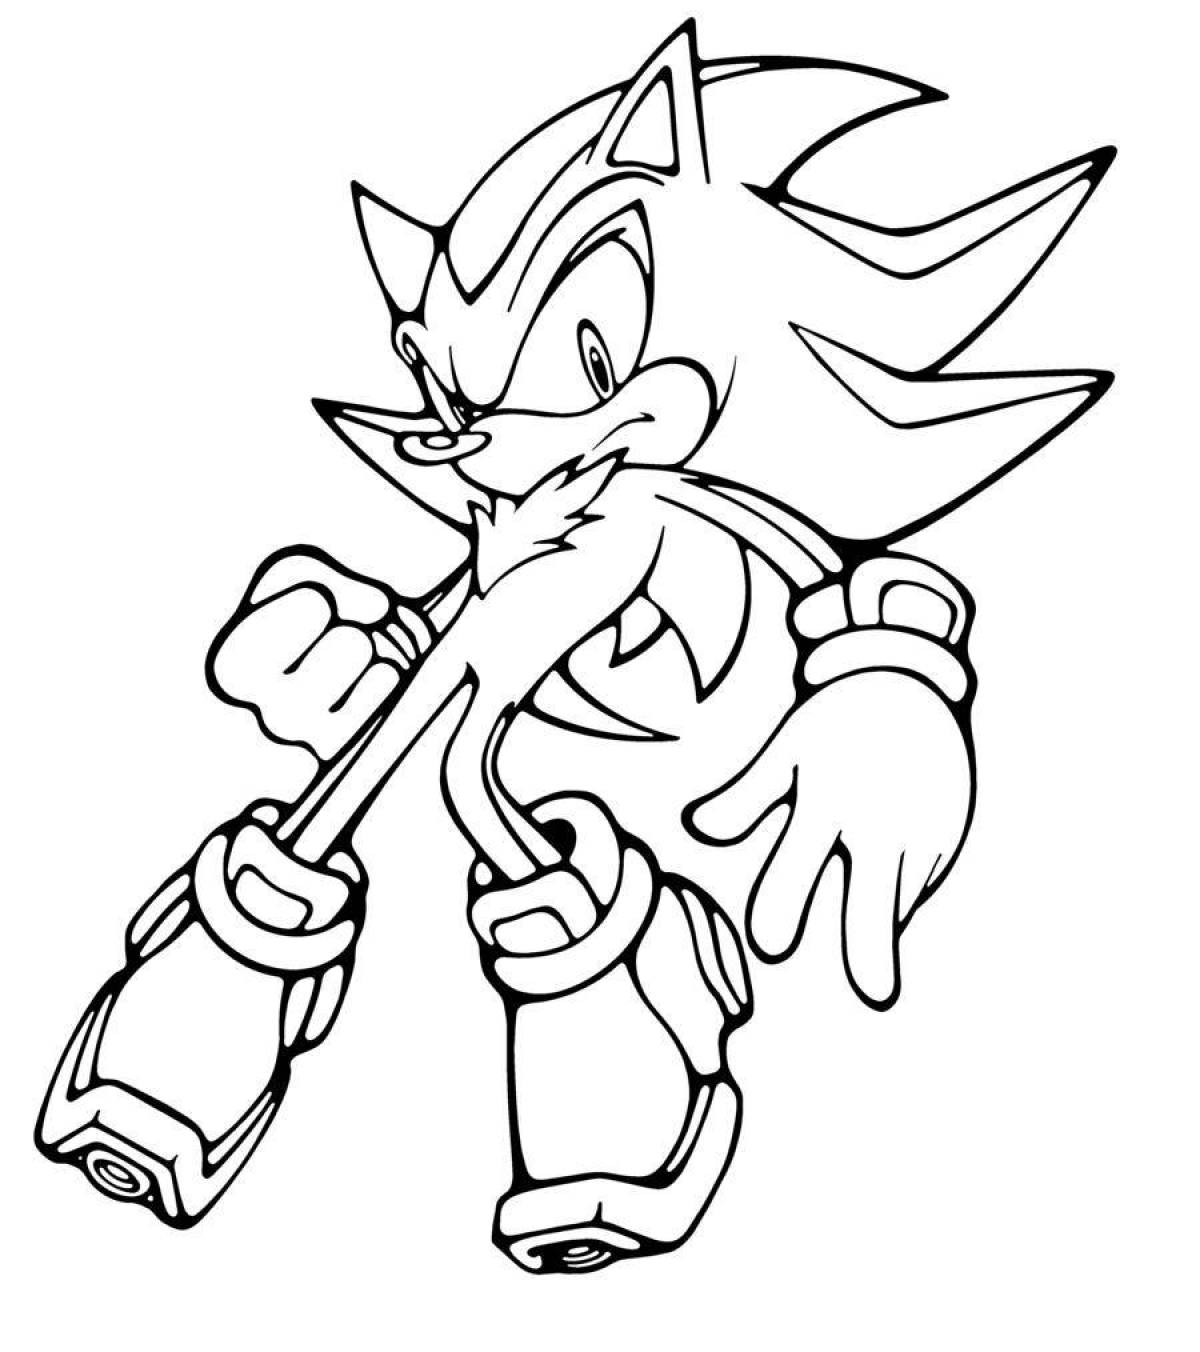 Attractive sonic game coloring book